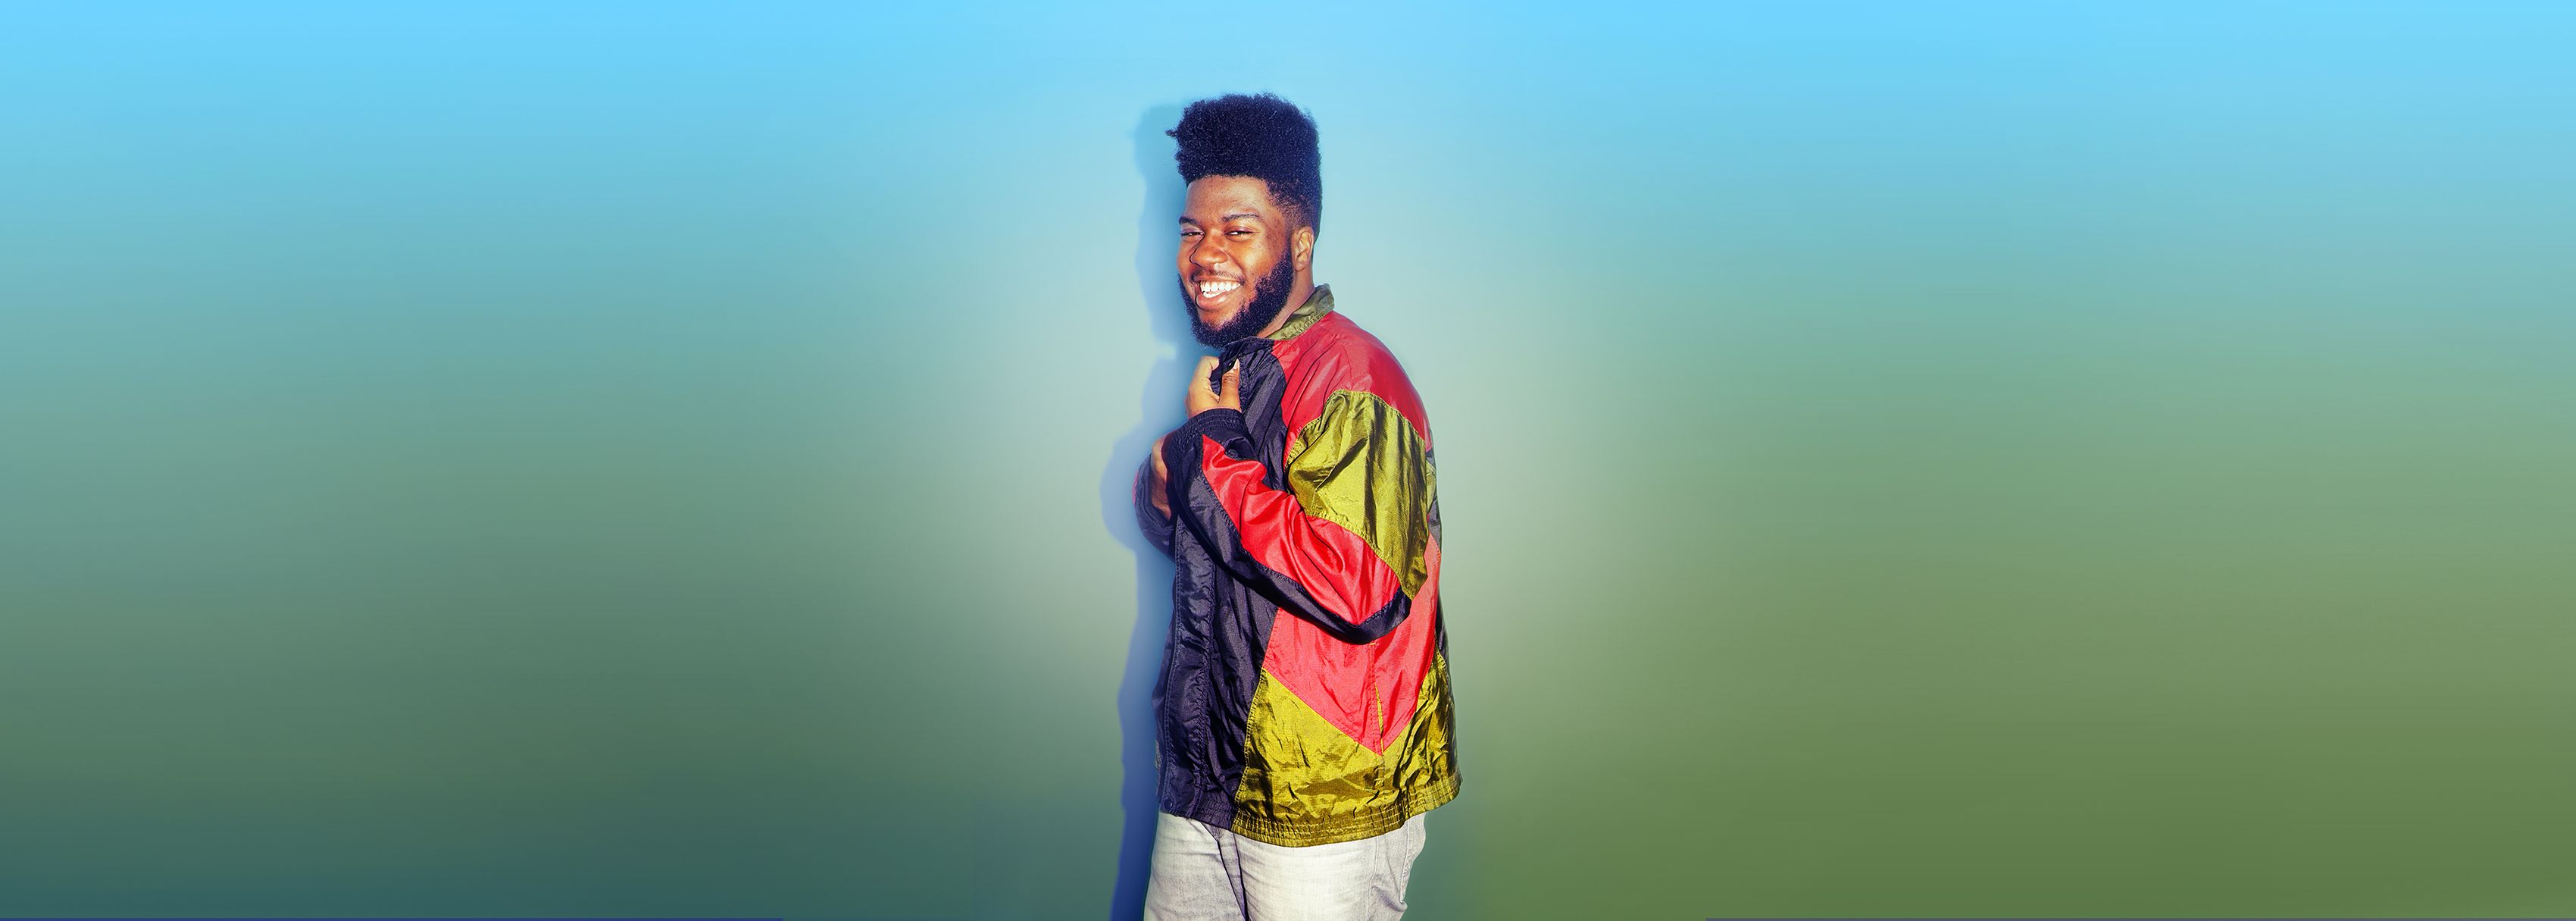 10 Khalid HD Wallpapers and Backgrounds